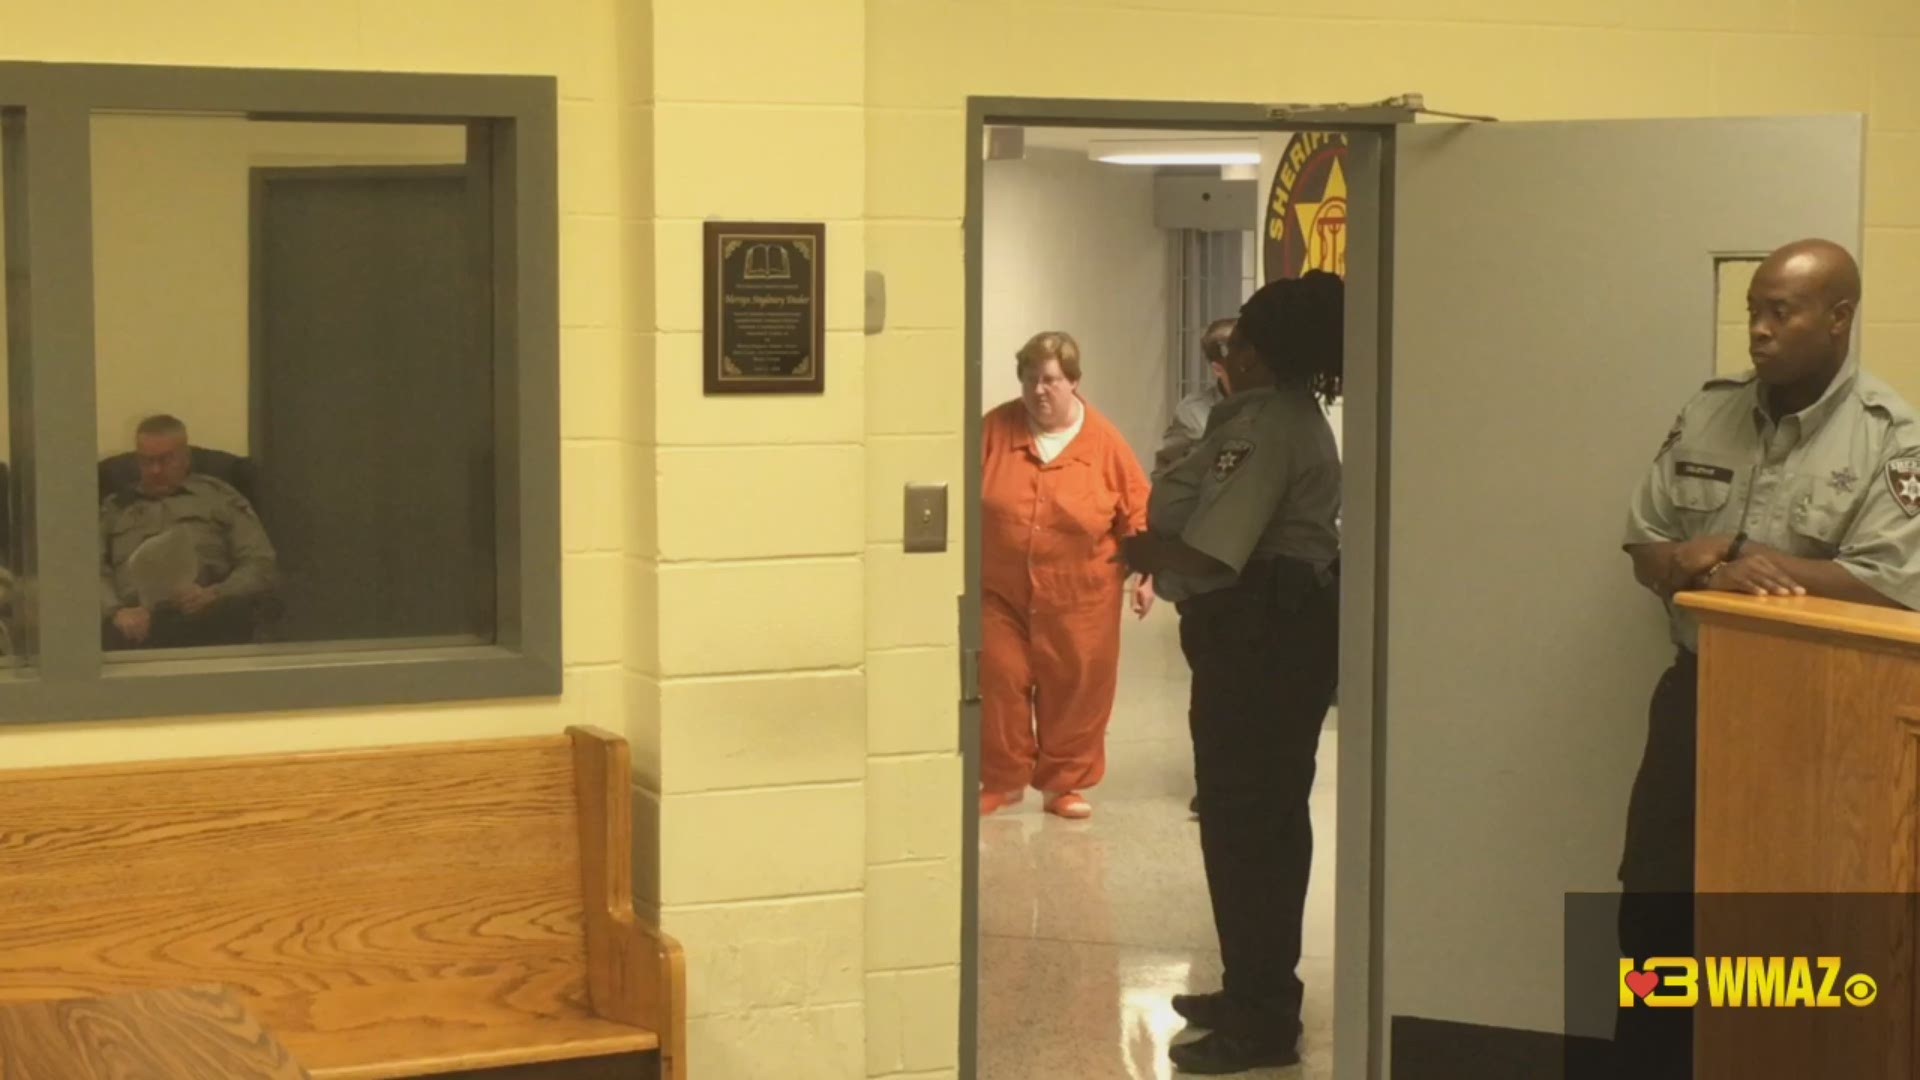 Elisabeth Cannon, 47, appeared before a Bibb County magistrate judge Tuesday. She's accused of shooting a Macon teenager in head.